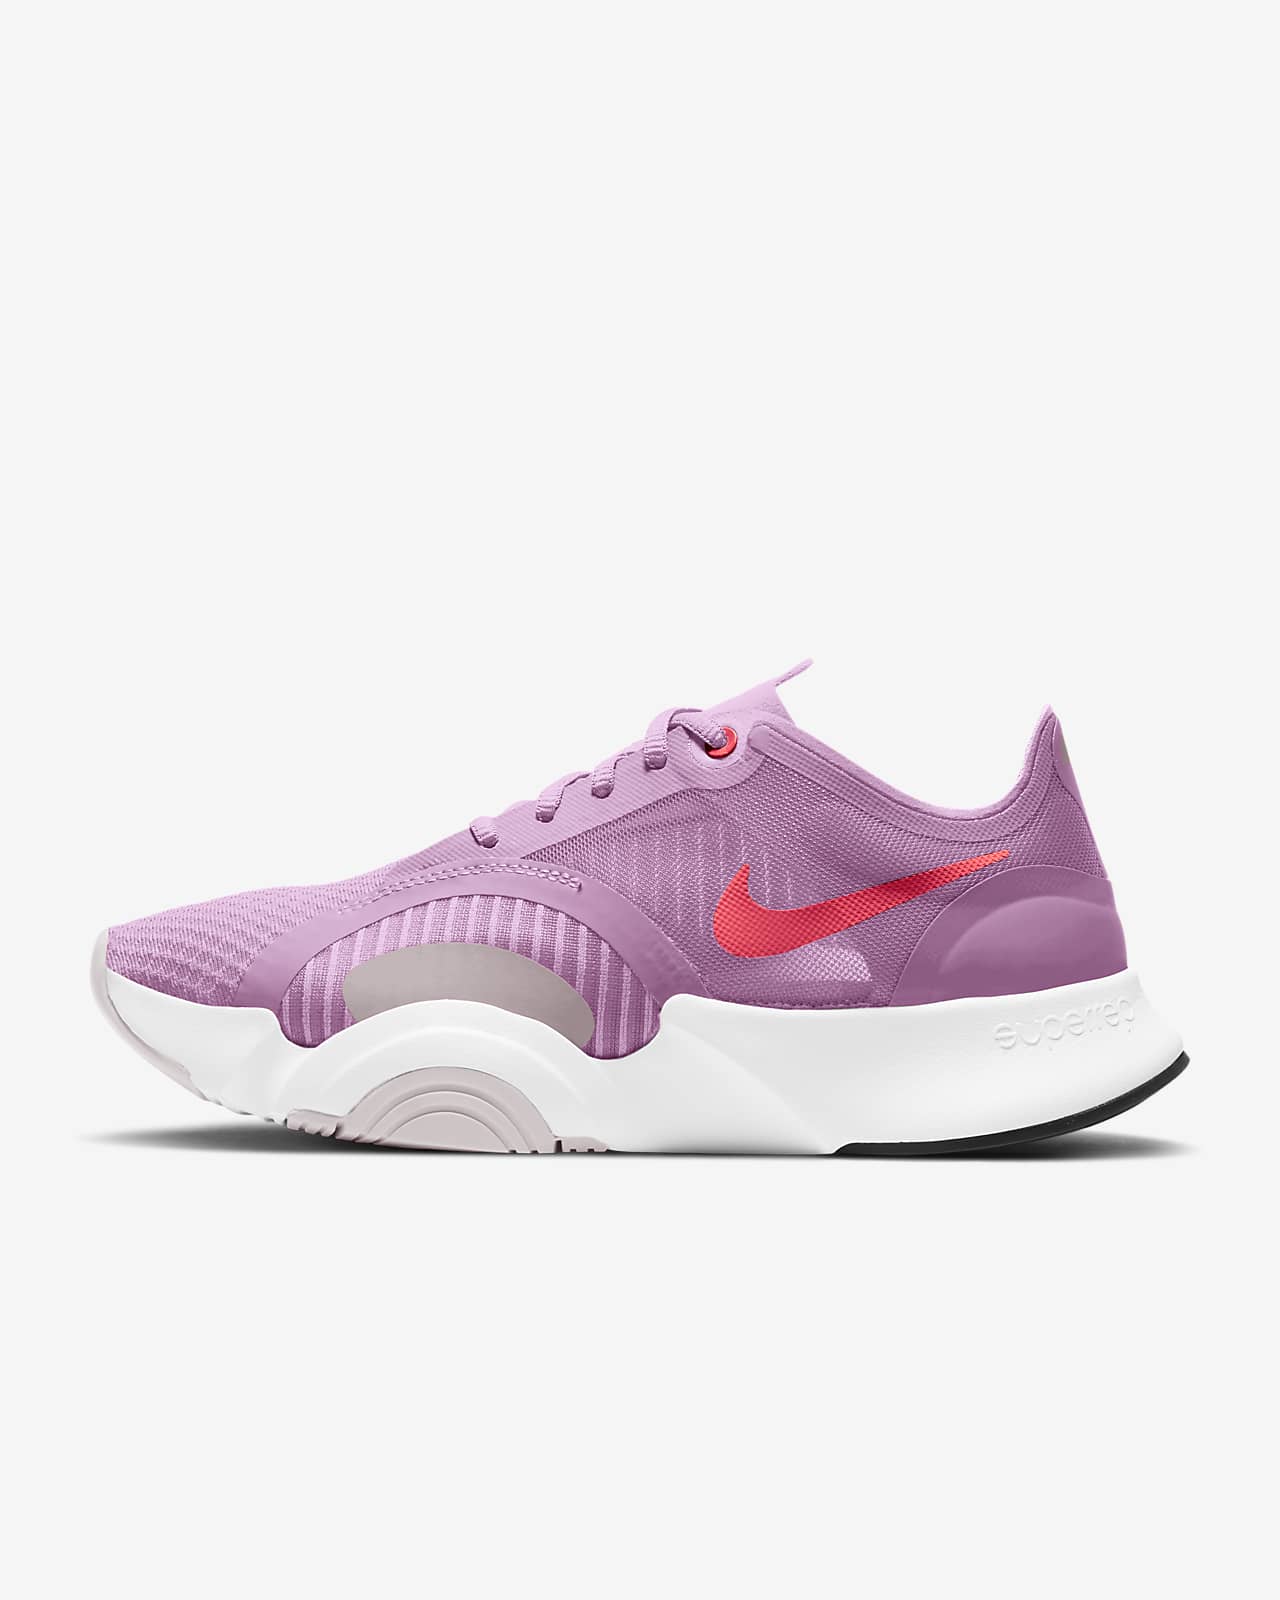 nike superrep go women's training shoes stores